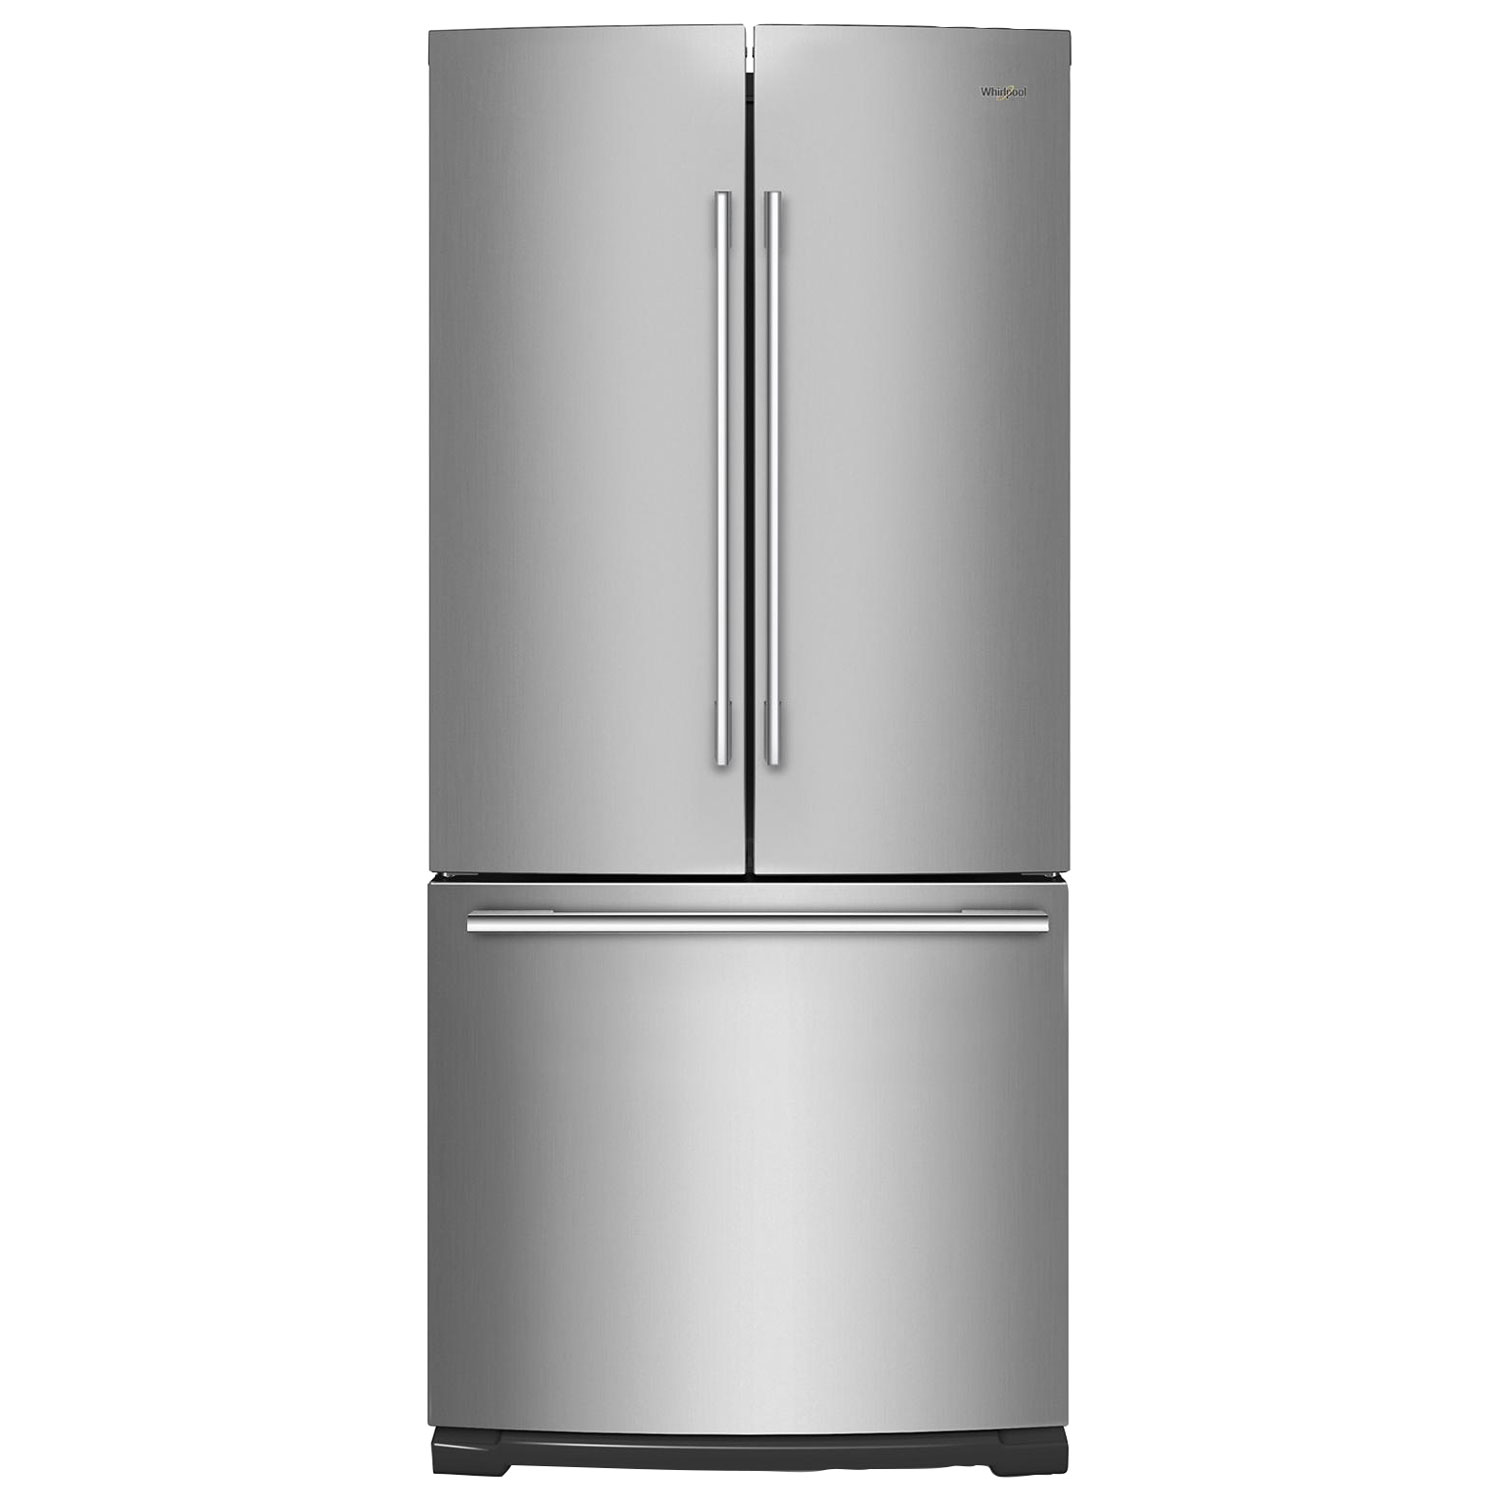 Whirlpool 30" 19.7 Cu. Ft. French Door Refrigerator with LED Lighting (WRFA60SFHZ) - Stainless Steel